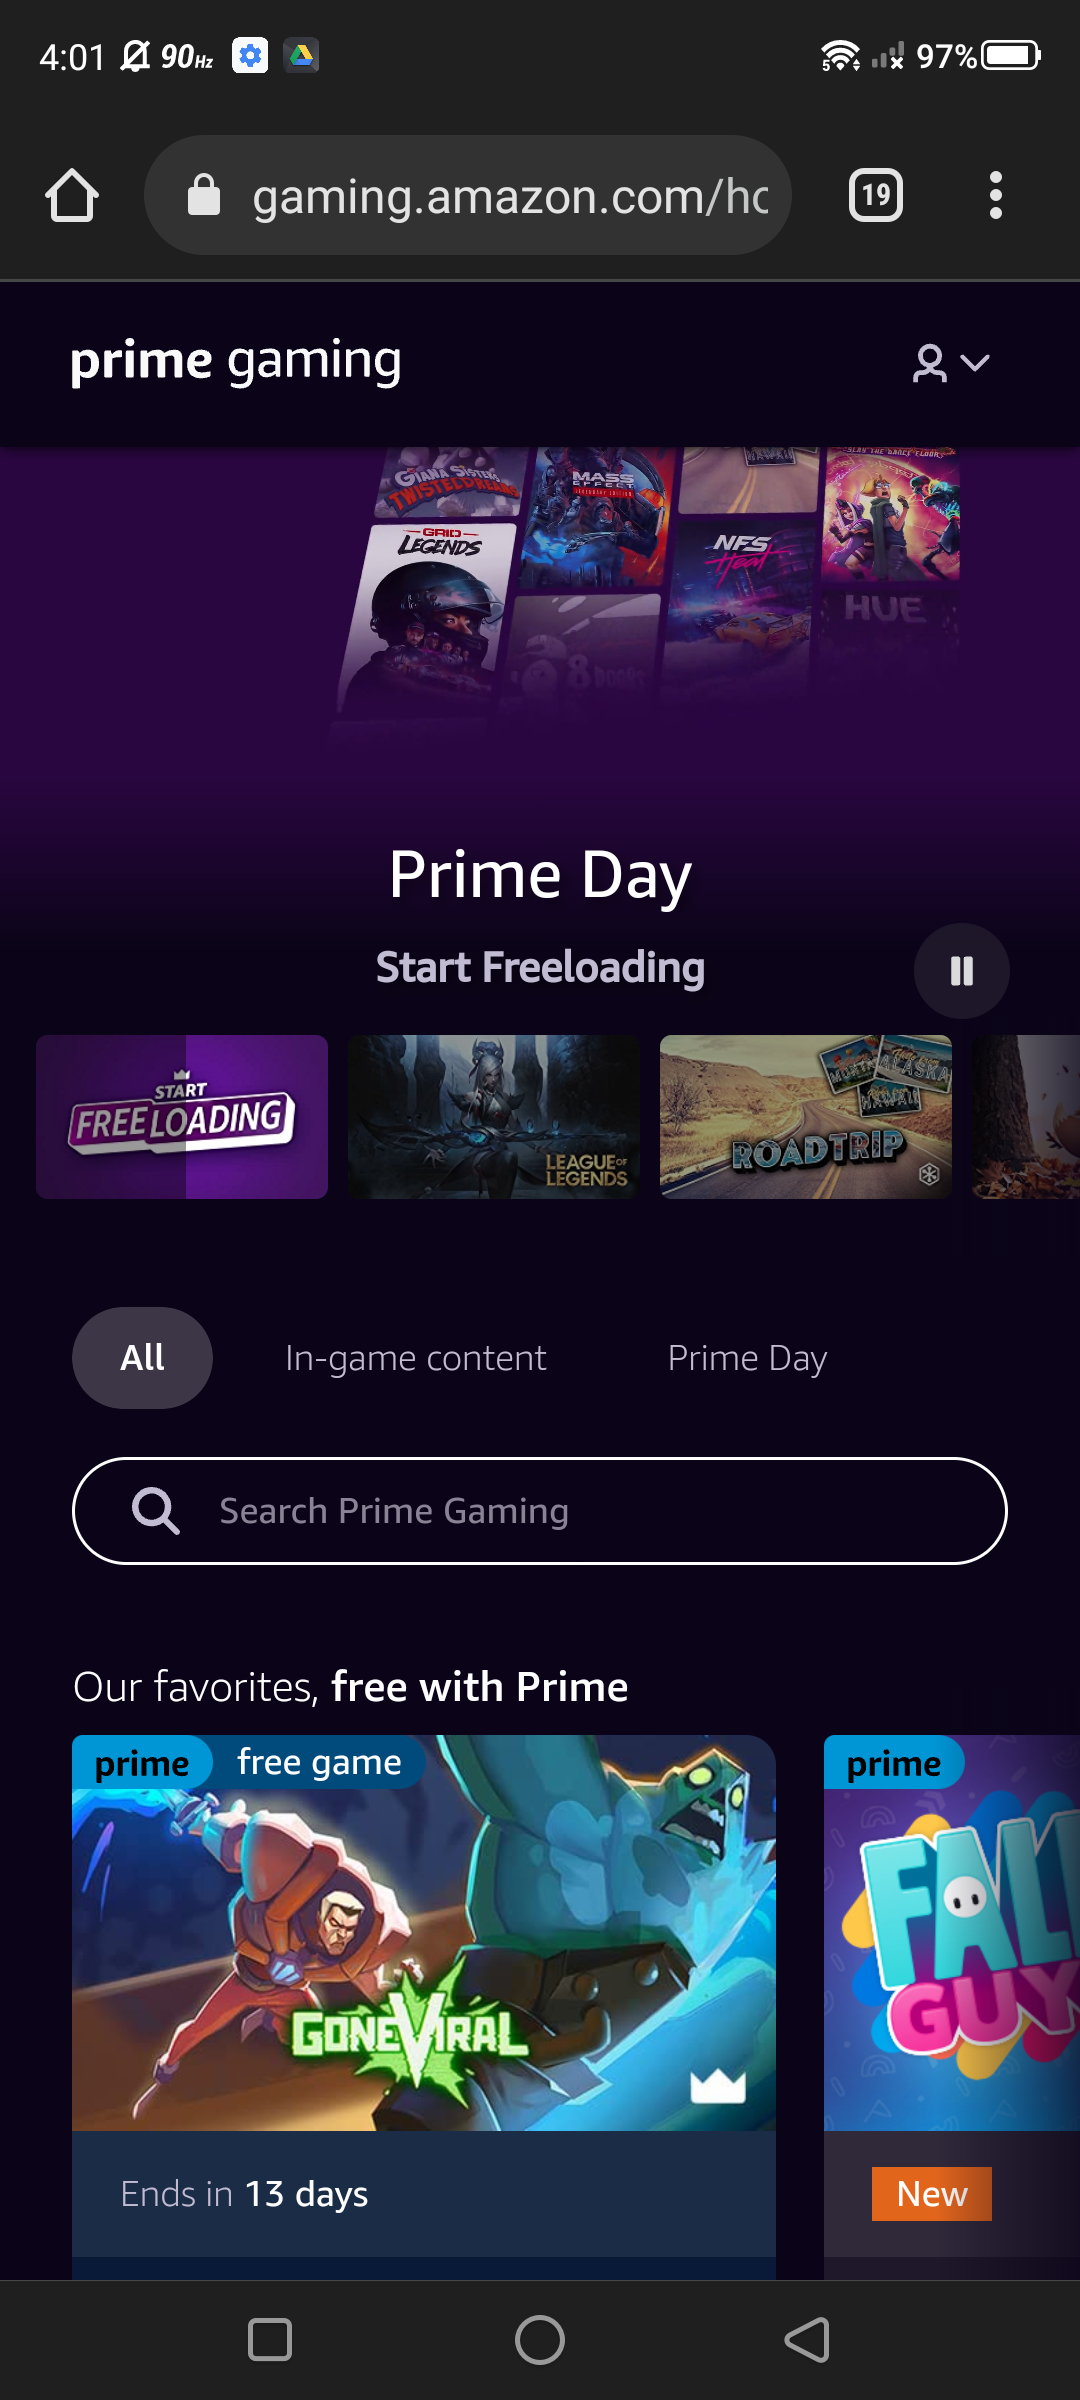 Screenshot of the Amazon Gaming home page (mobile web browser)